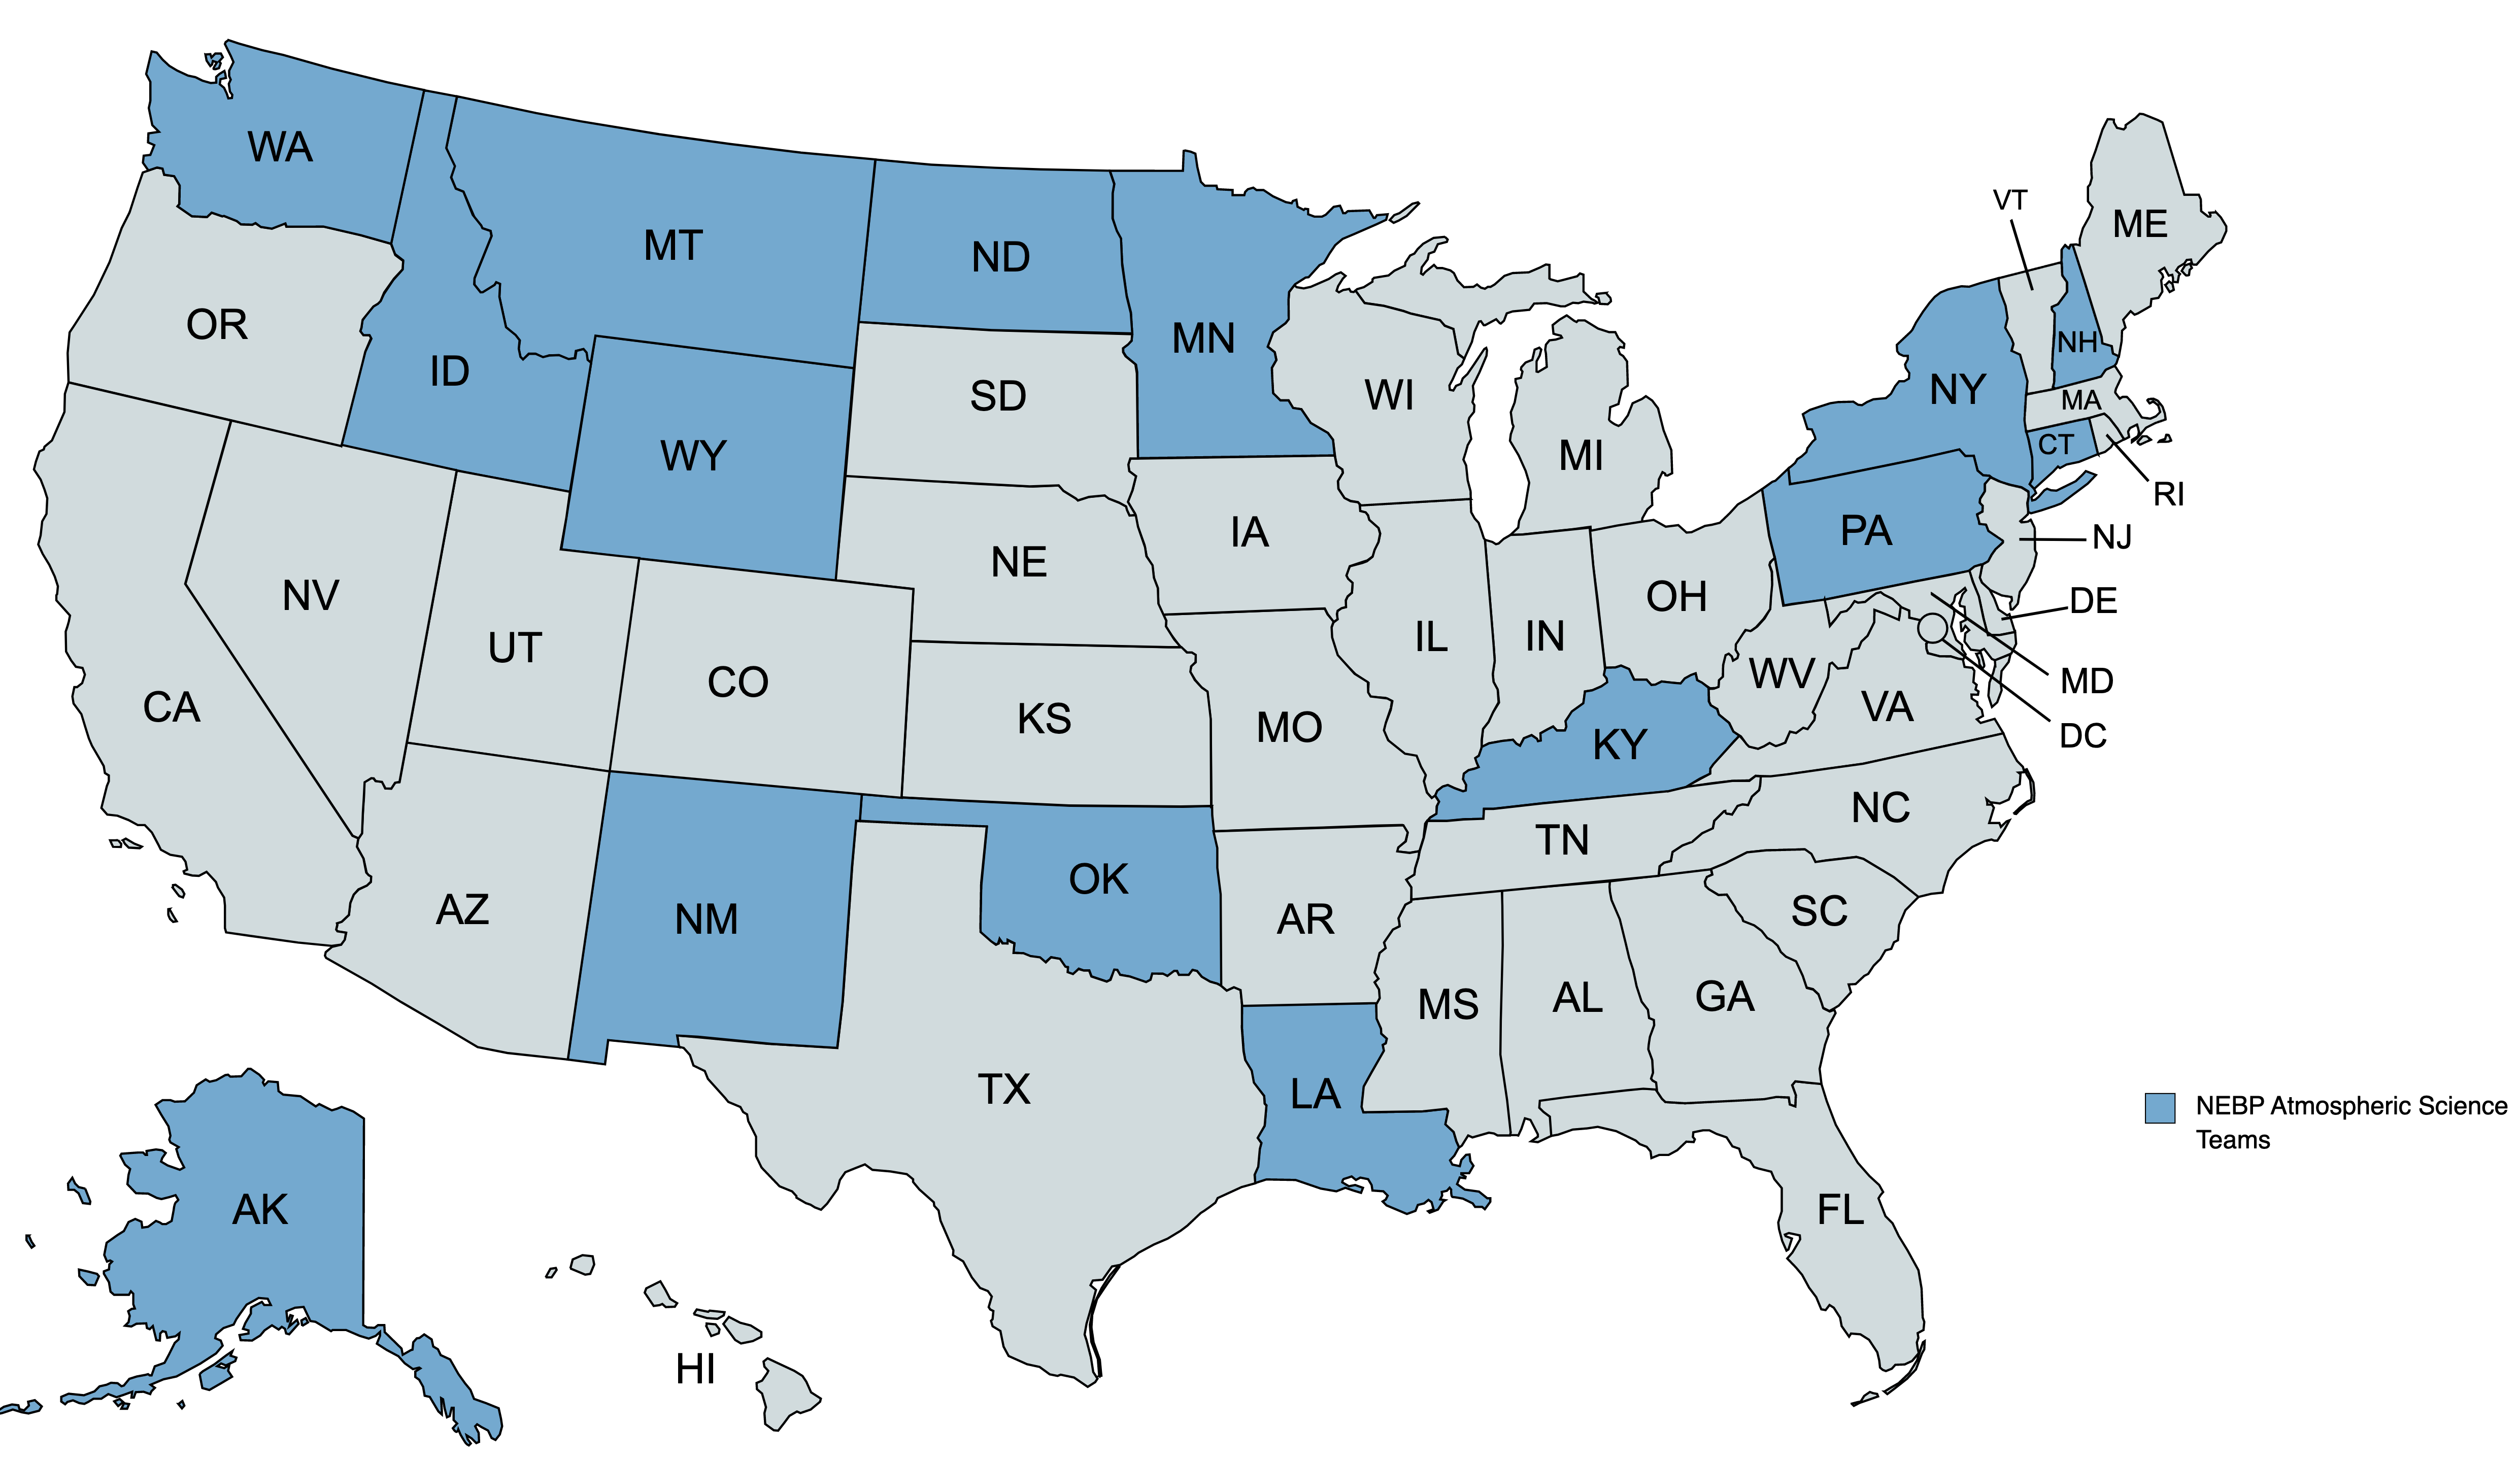 16 states are highlighted in blue, indicating which states have participating NEBP teams in the upcoming 2023 and 2024 eclipses.